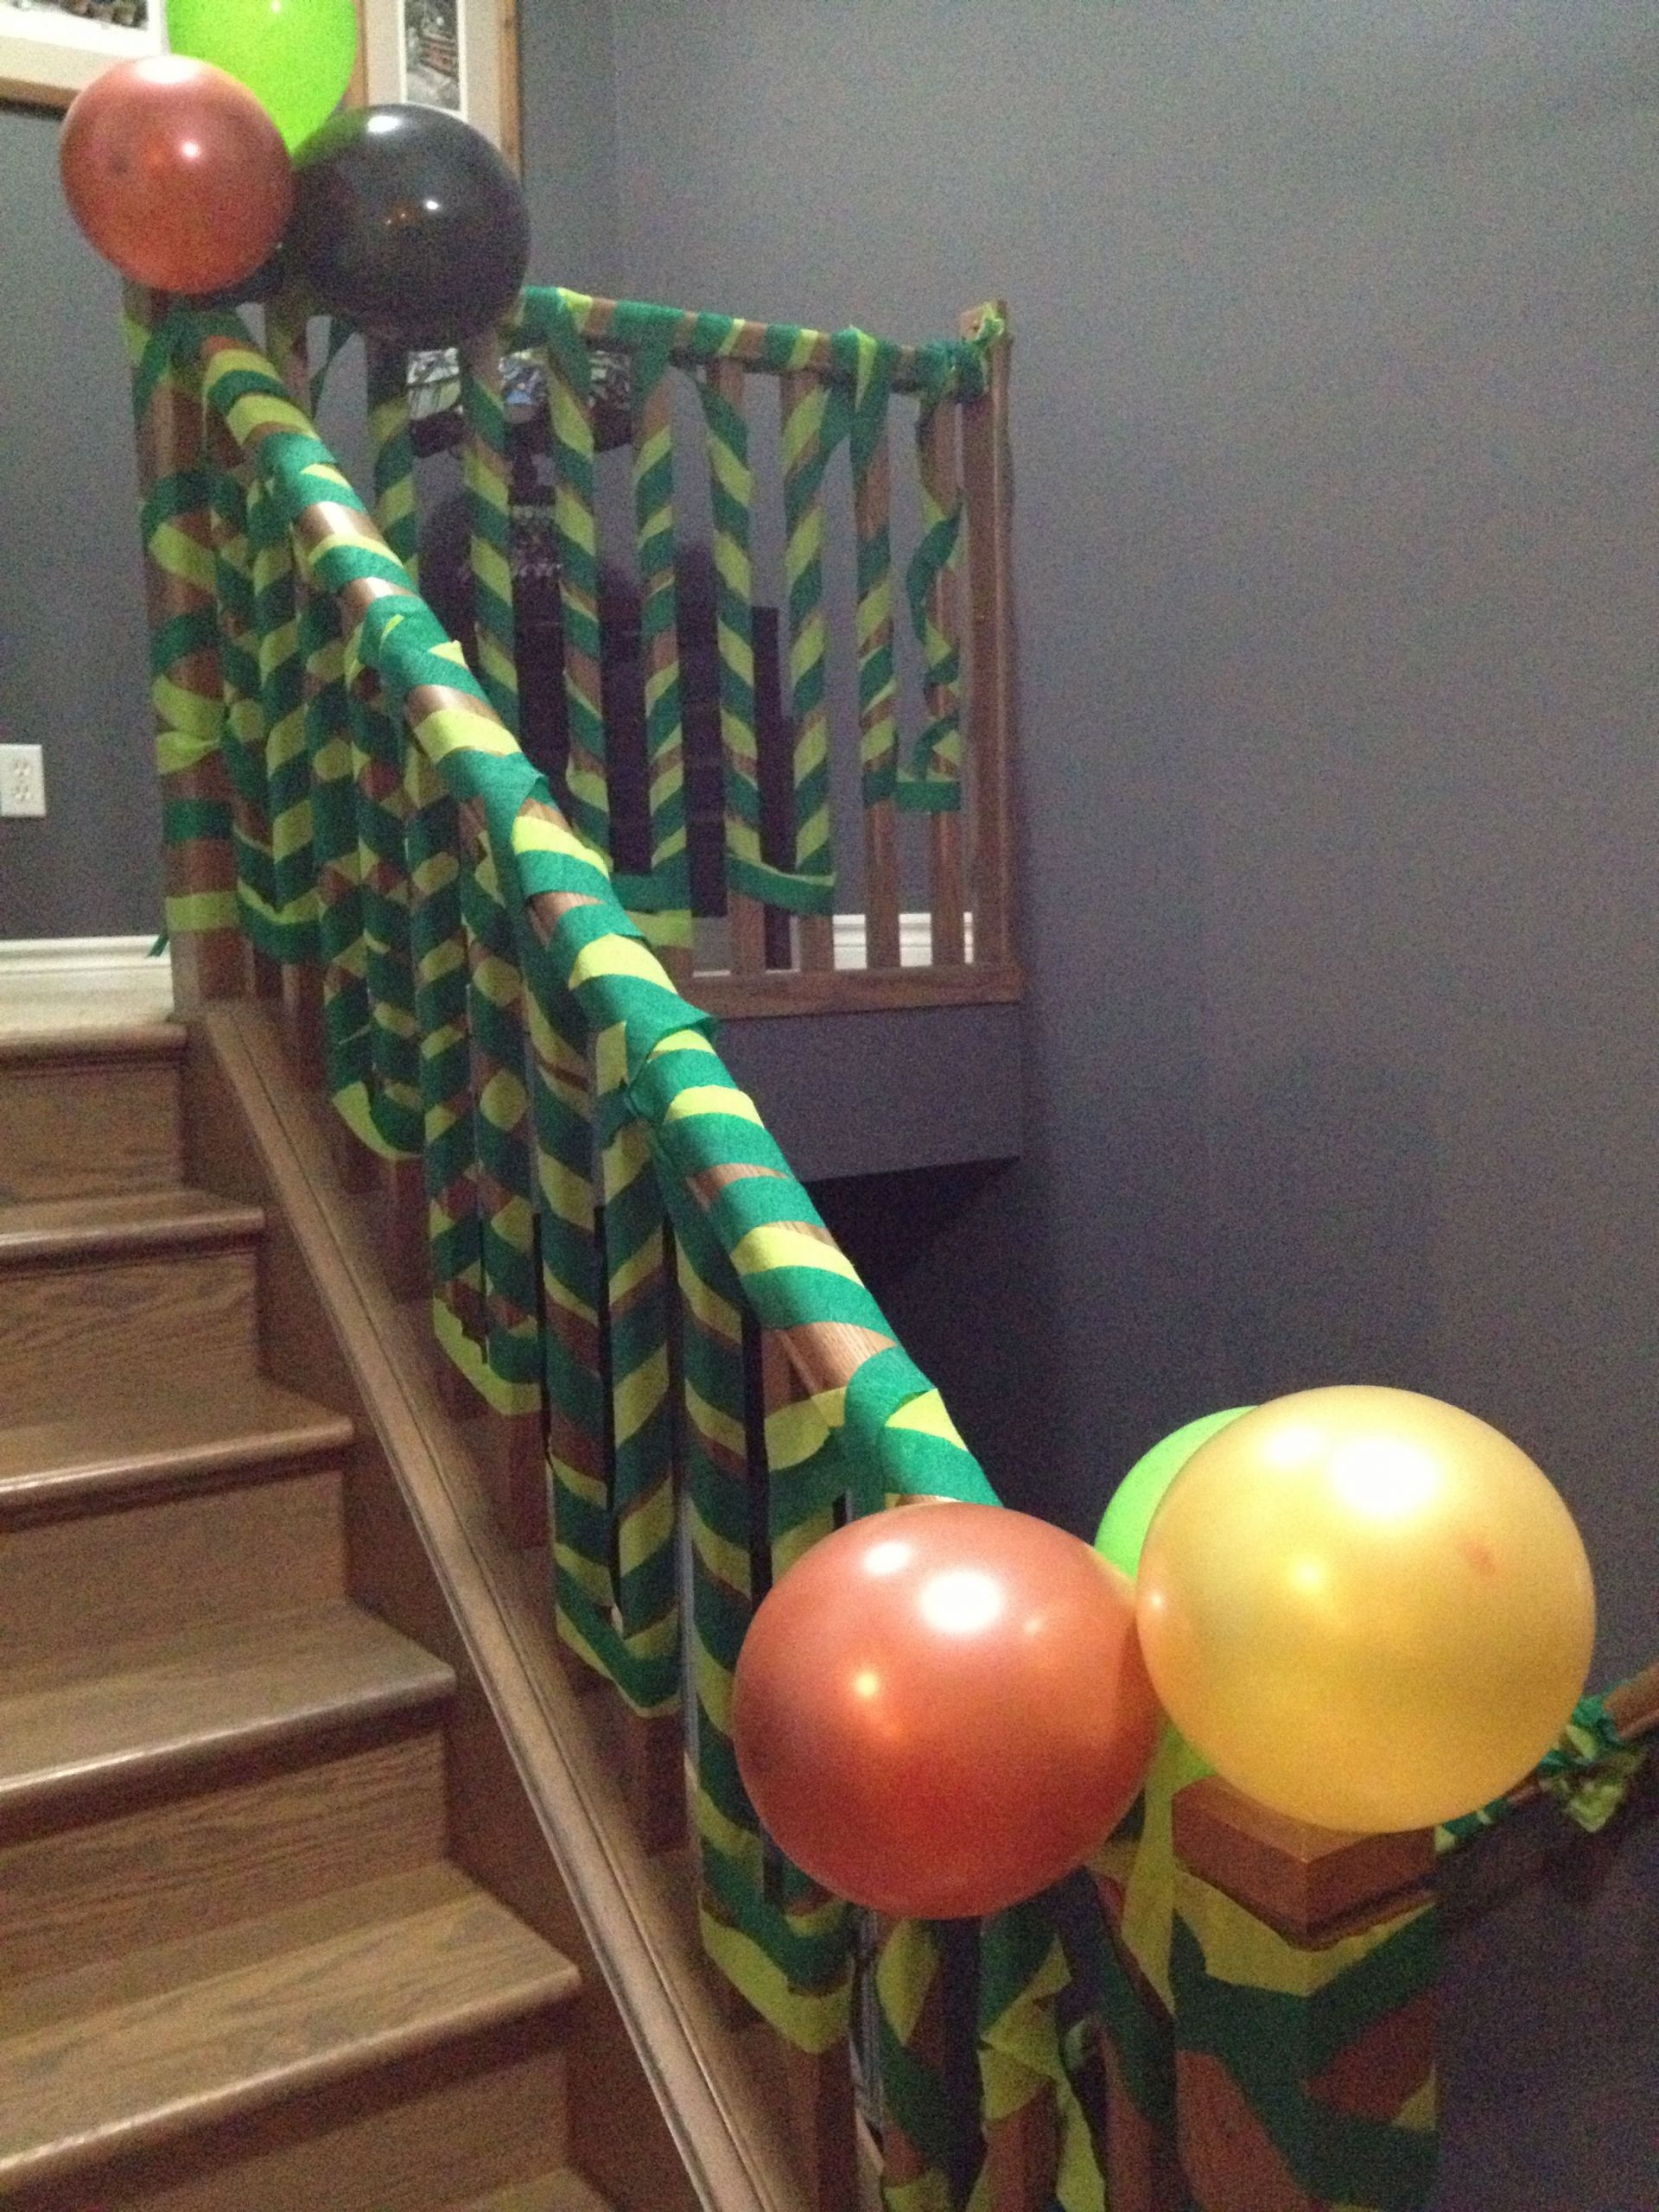 Streamer Decoration Ideas For Birthday Party
 Army camouflage streamer decoration